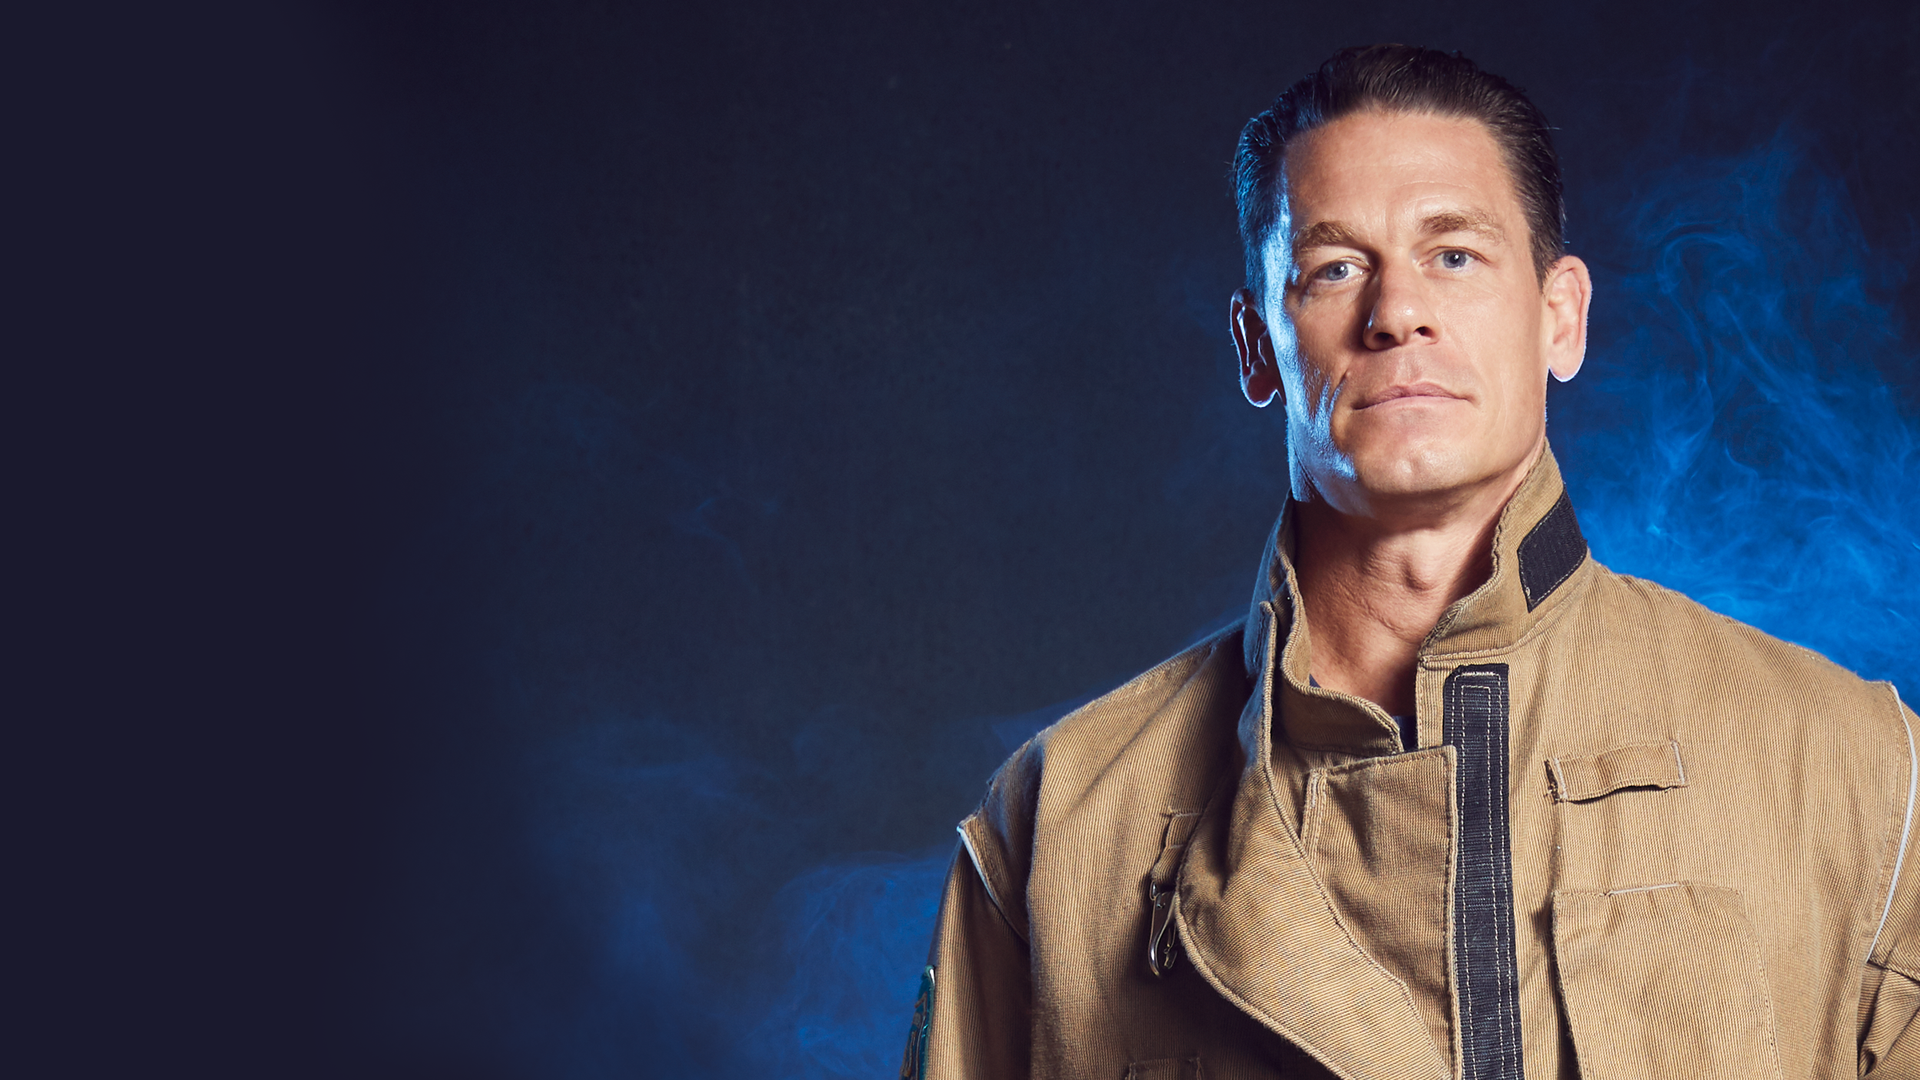 John Cena Reveals All About His WWE Career, Views on Parenting, and the Definition of Heroism